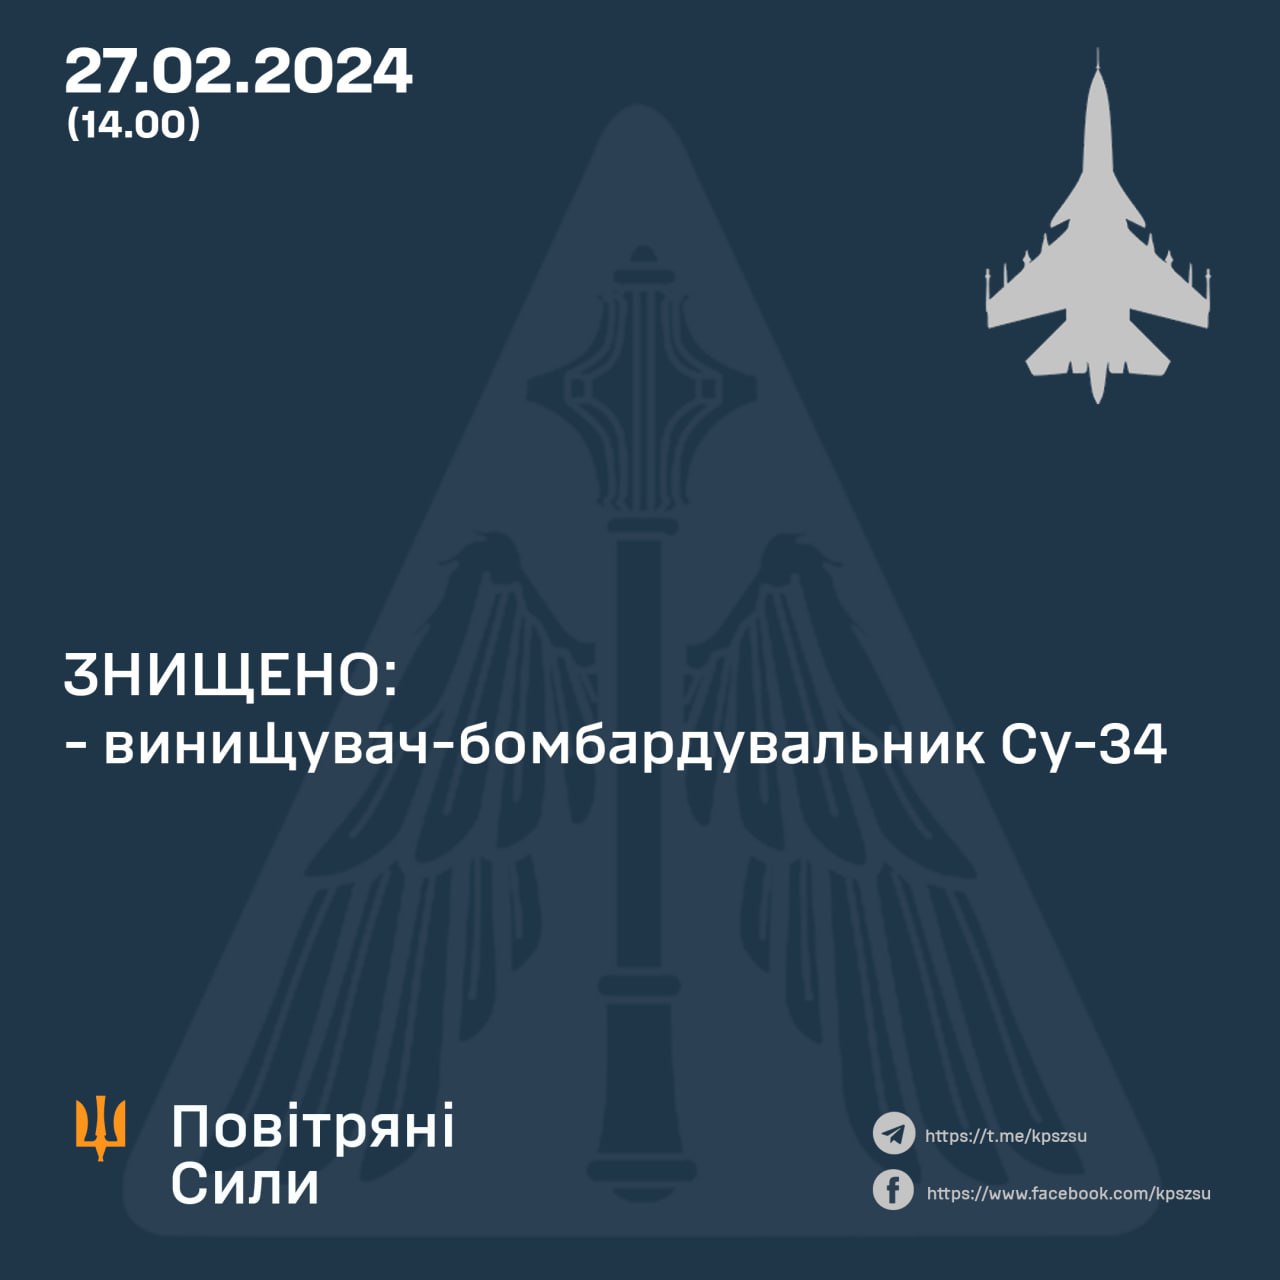 Defenders of Ukraine Shoot Down 2nd russian Su-34 Aircraft For Today, Defense Express